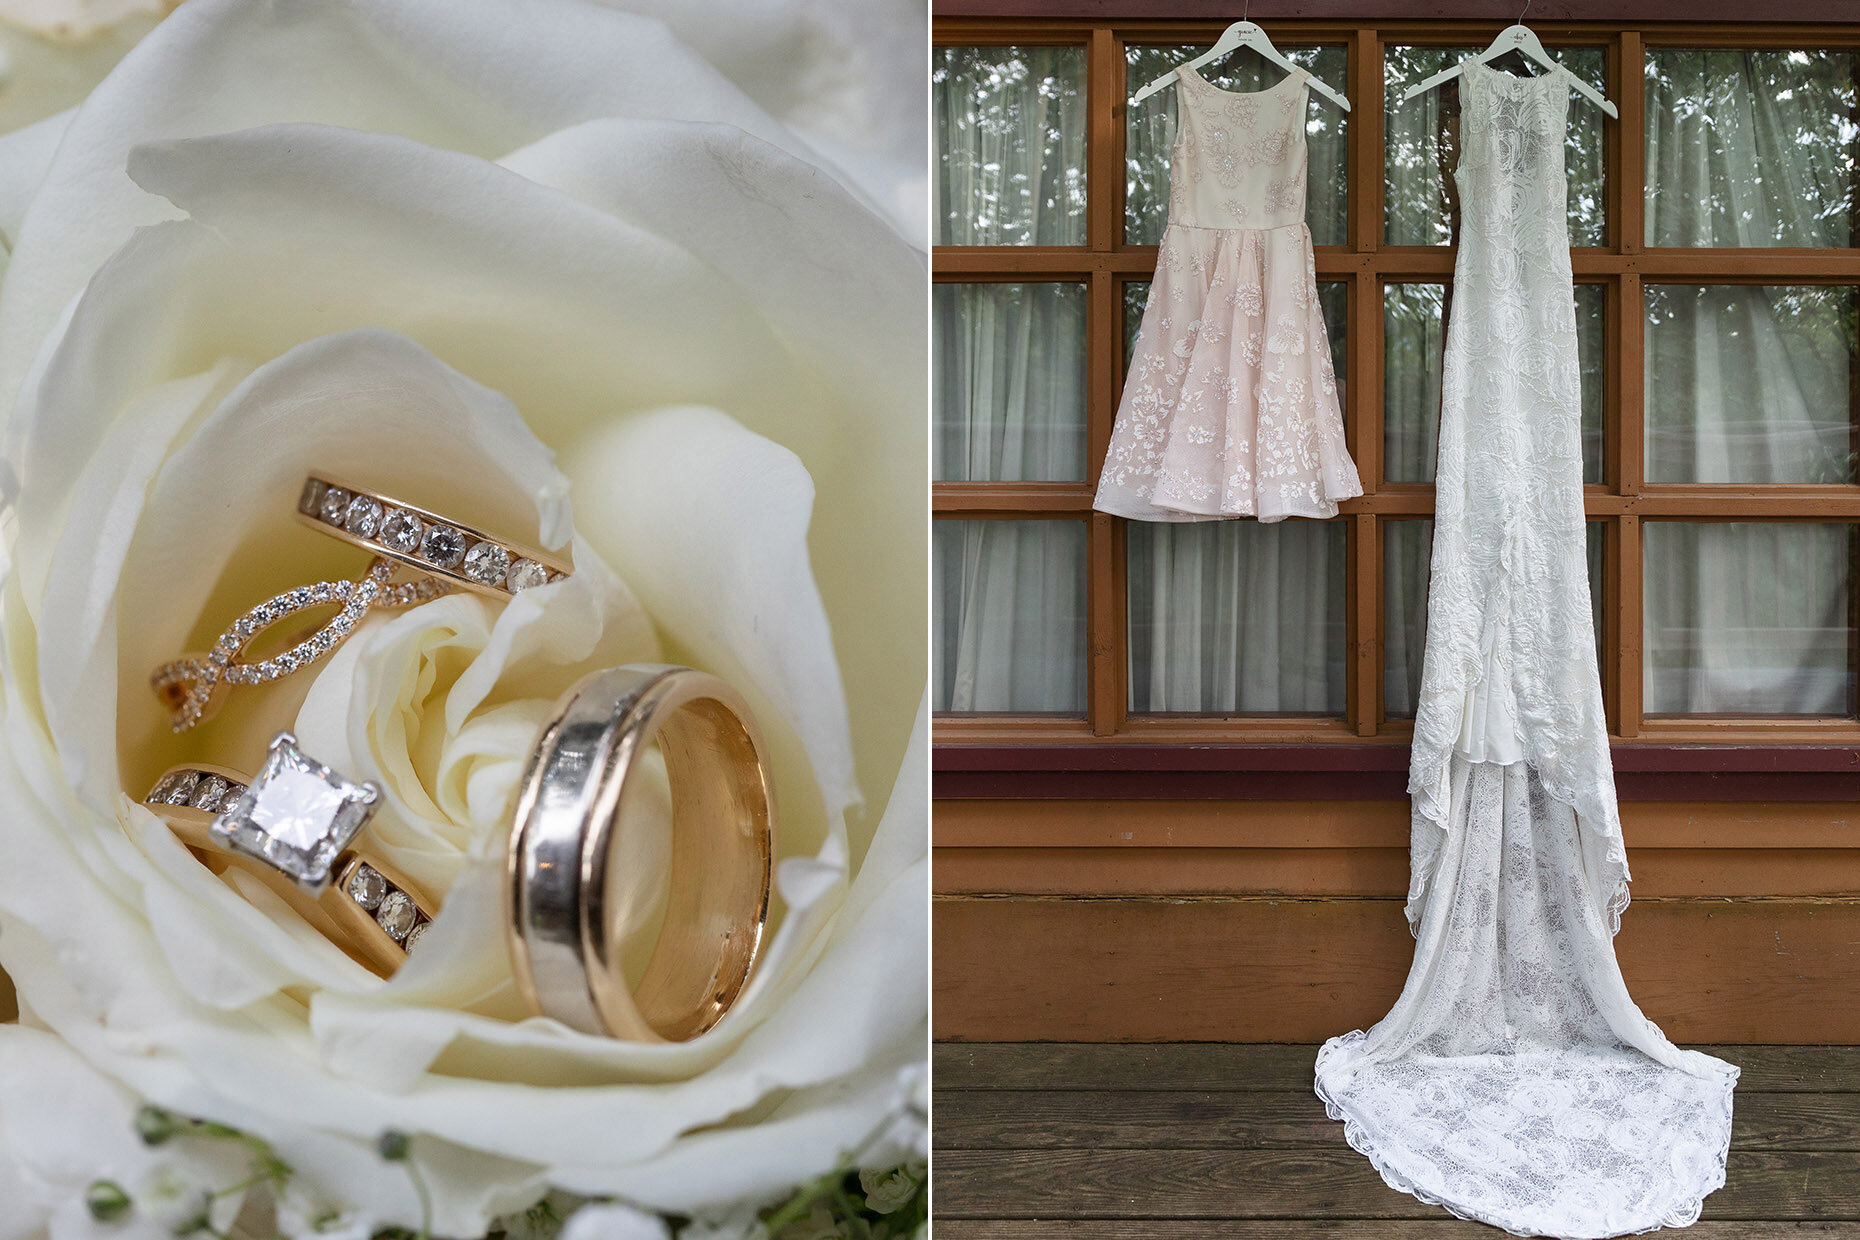 Bride's Rings and dresses